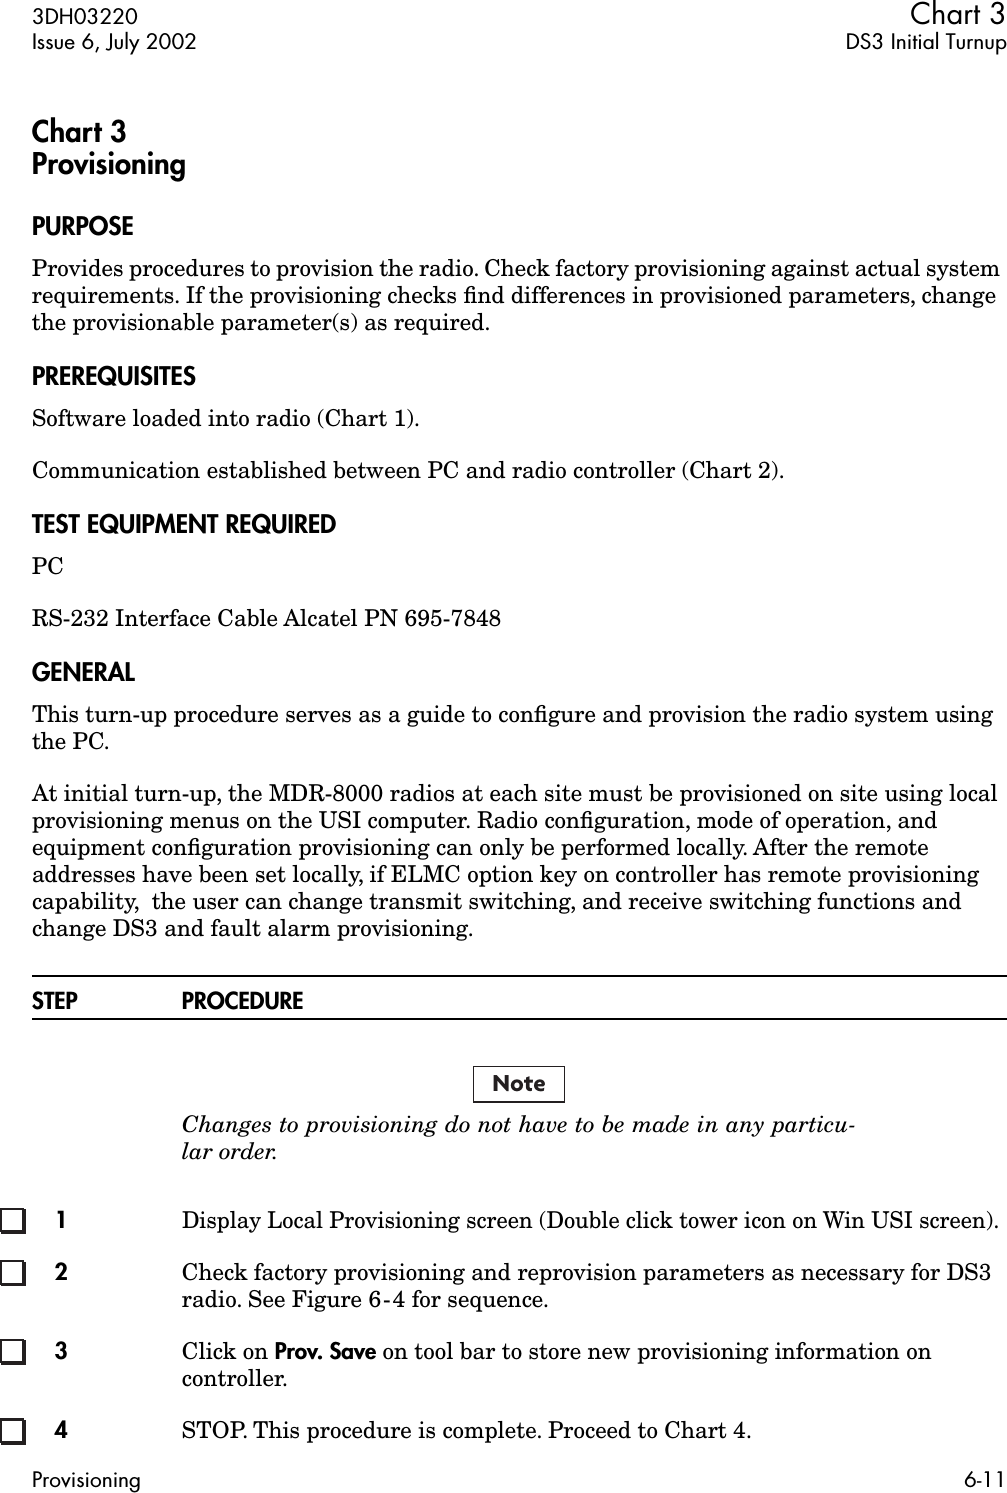  3DH03220 Chart 3 Issue 6, July 2002 DS3 Initial TurnupProvisioning 6-11 Chart 3Provisioning PURPOSE Provides procedures to provision the radio. Check factory provisioning against actual system requirements. If the provisioning checks ﬁnd differences in provisioned parameters, change the provisionable parameter(s) as required. PREREQUISITES Software loaded into radio (Chart 1).Communication established between PC and radio controller (Chart 2). TEST EQUIPMENT REQUIRED PCRS-232 Interface Cable Alcatel PN 695-7848 GENERAL This turn-up procedure serves as a guide to conﬁgure and provision the radio system using the PC.At initial turn-up, the MDR-8000 radios at each site must be provisioned on site using local provisioning menus on the USI computer. Radio conﬁguration, mode of operation, and equipment conﬁguration provisioning can only be performed locally. After the remote addresses have been set locally, if ELMC option key on controller has remote provisioning capability,  the user can change transmit switching, and receive switching functions and change DS3 and fault alarm provisioning. STEP PROCEDURE Changes to provisioning do not have to be made in any particu-lar order. 1 Display Local Provisioning screen (Double click tower icon on Win USI screen).  2 Check factory provisioning and reprovision parameters as necessary for DS3 radio. See Figure 6-4 for sequence. 3 Click on  Prov. Save  on tool bar to store new provisioning information on controller. 4 STOP. This procedure is complete. Proceed to Chart 4.Note